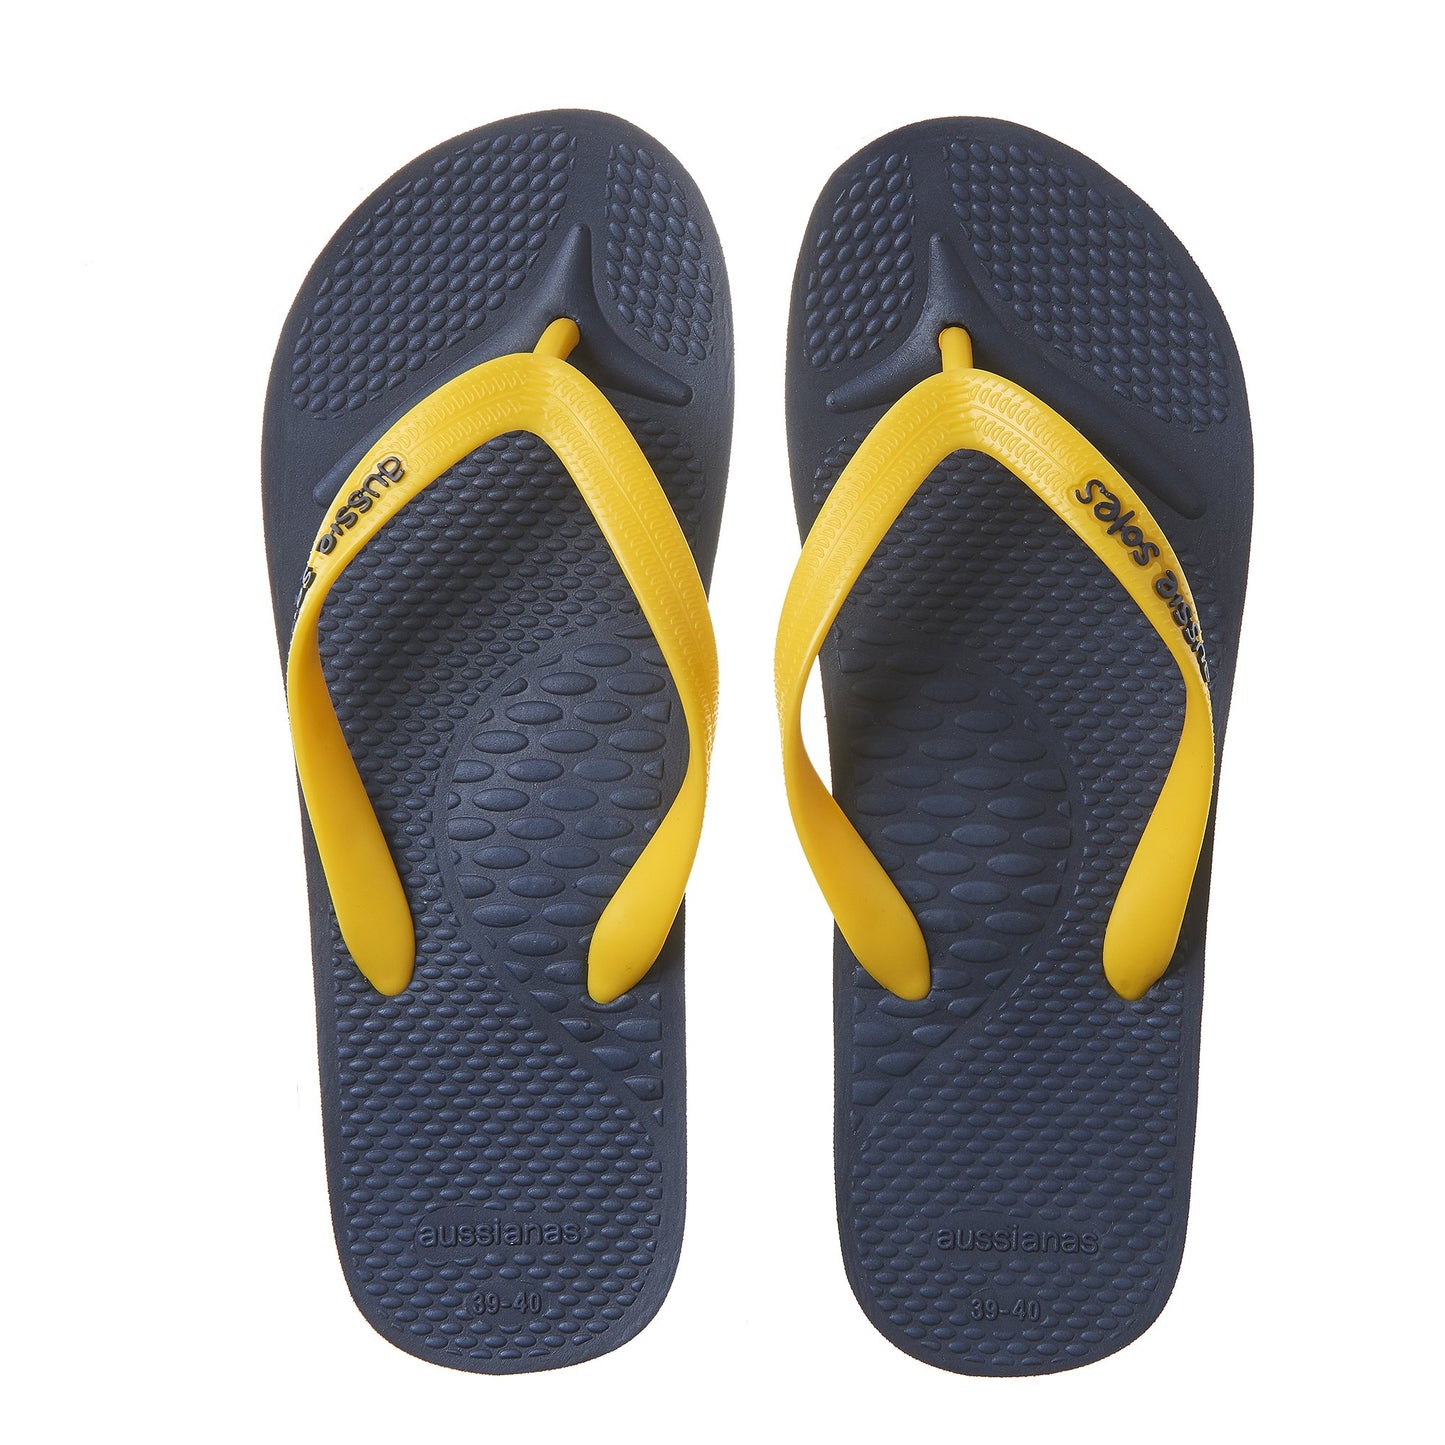 Classic Orthotic Flip Flops with Arch Support